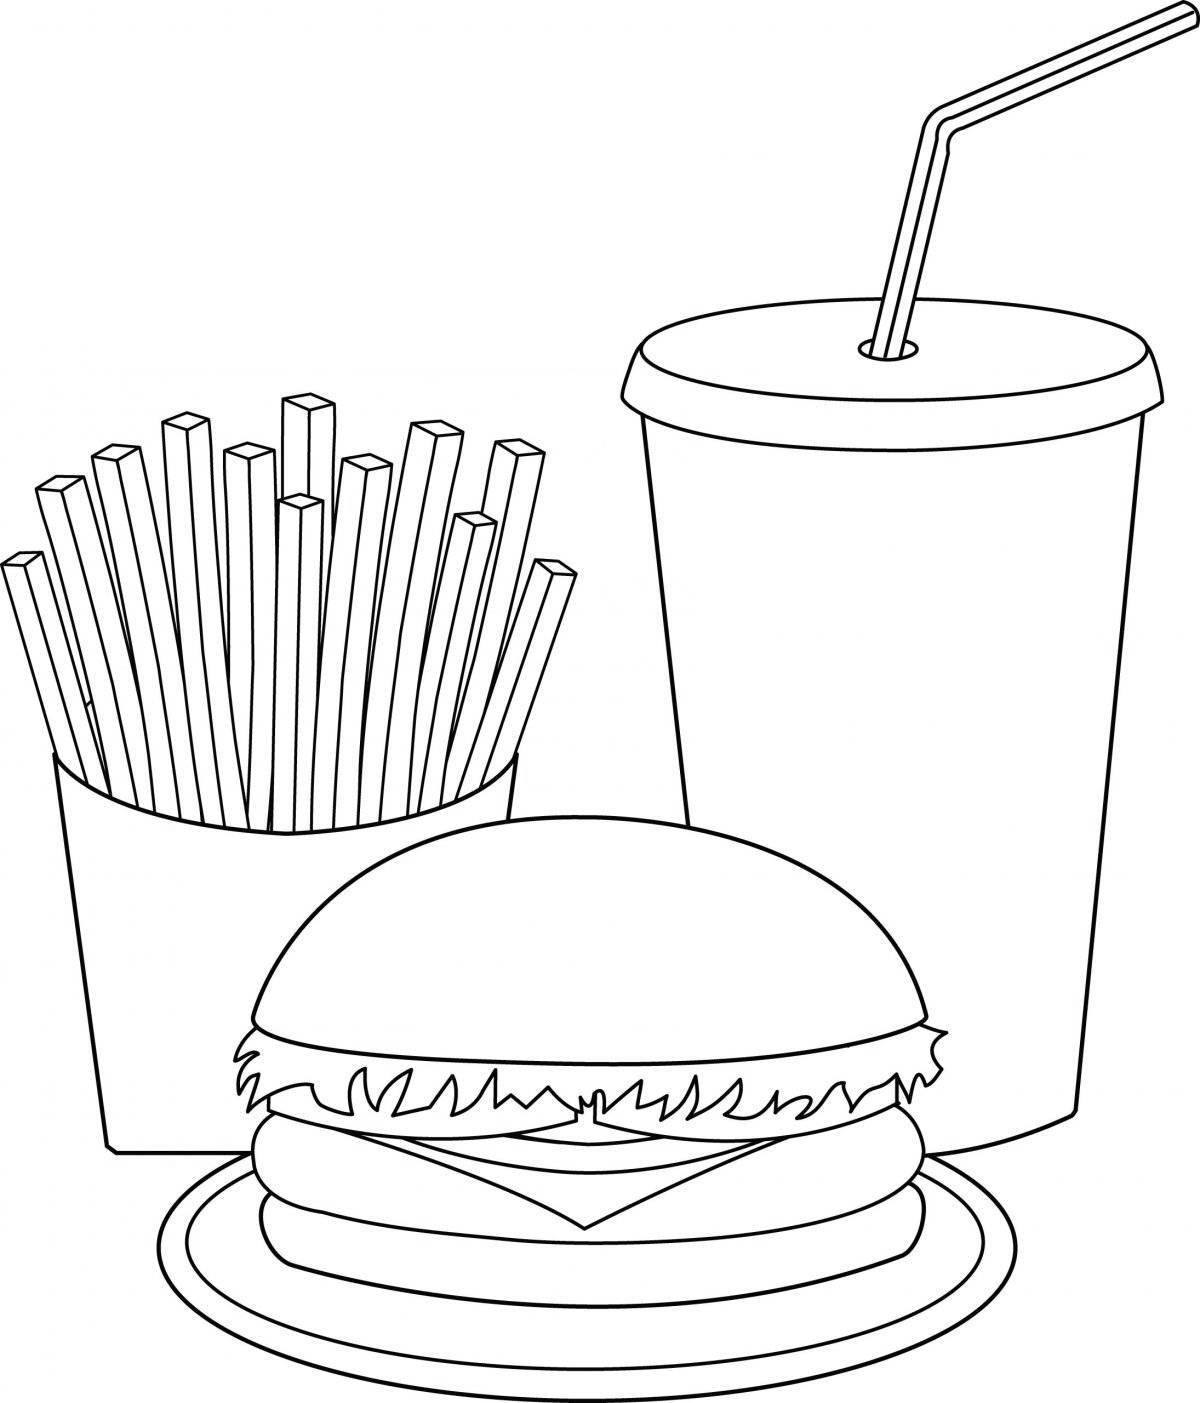 Nutritious easy food coloring book